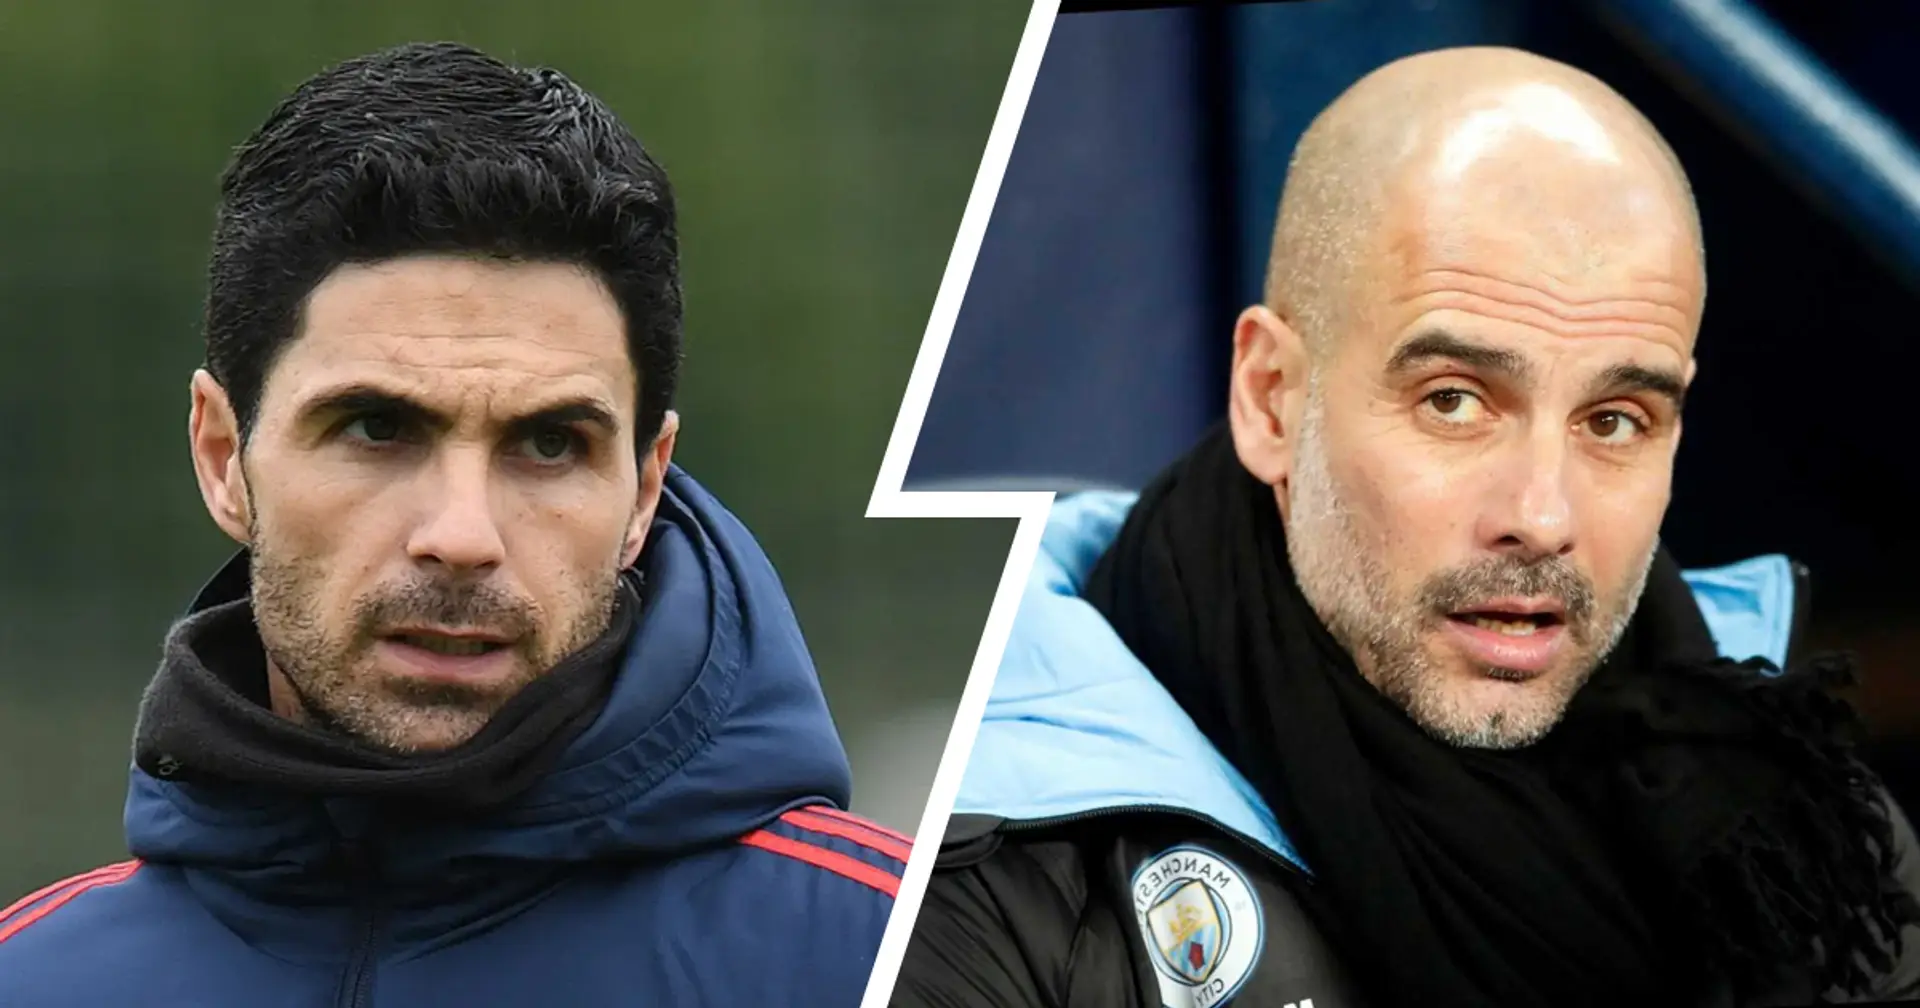 Arsenal vs Man City: preview, line-ups, score predictions, key stats and more